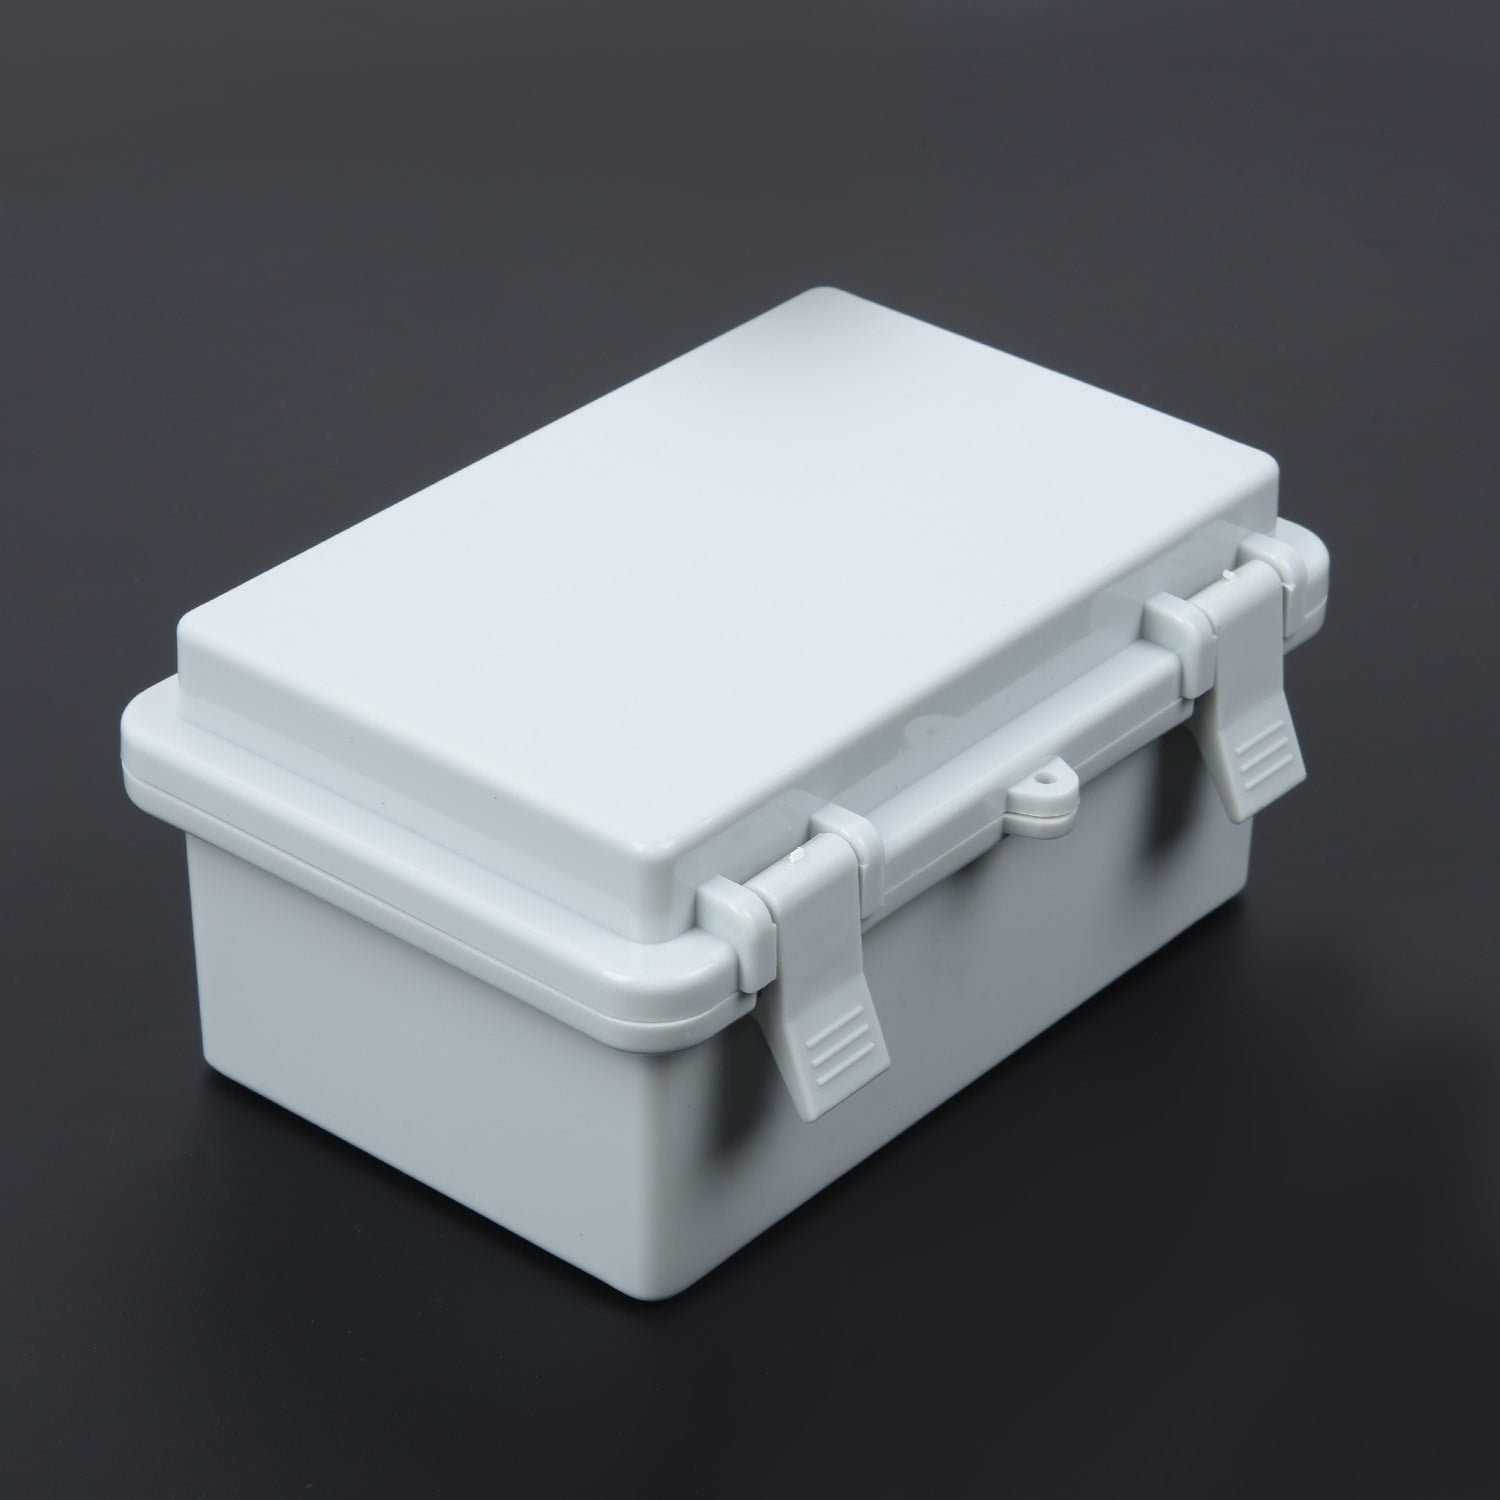 Waterproof Electronic Junction Terminal Cable Control Box Enclosure Case Durable